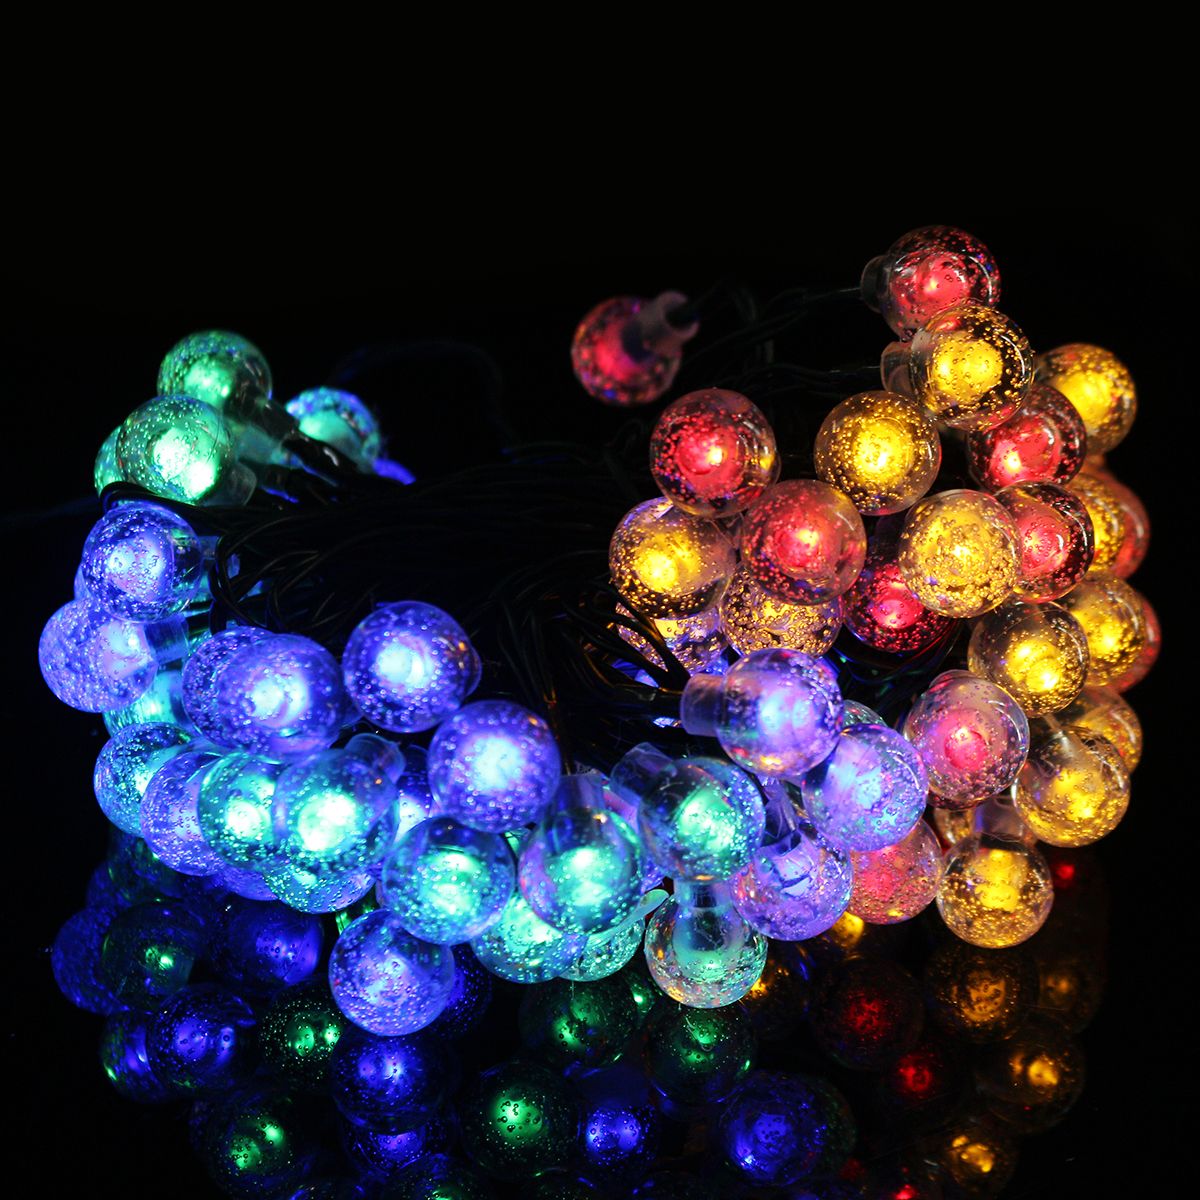 12M-8-Modes-100LED-Solar-String-Light-Crystal-Ball-Fairy-Lamp-Wedding-Holiday-Home-Party-Christmas-T-1568461